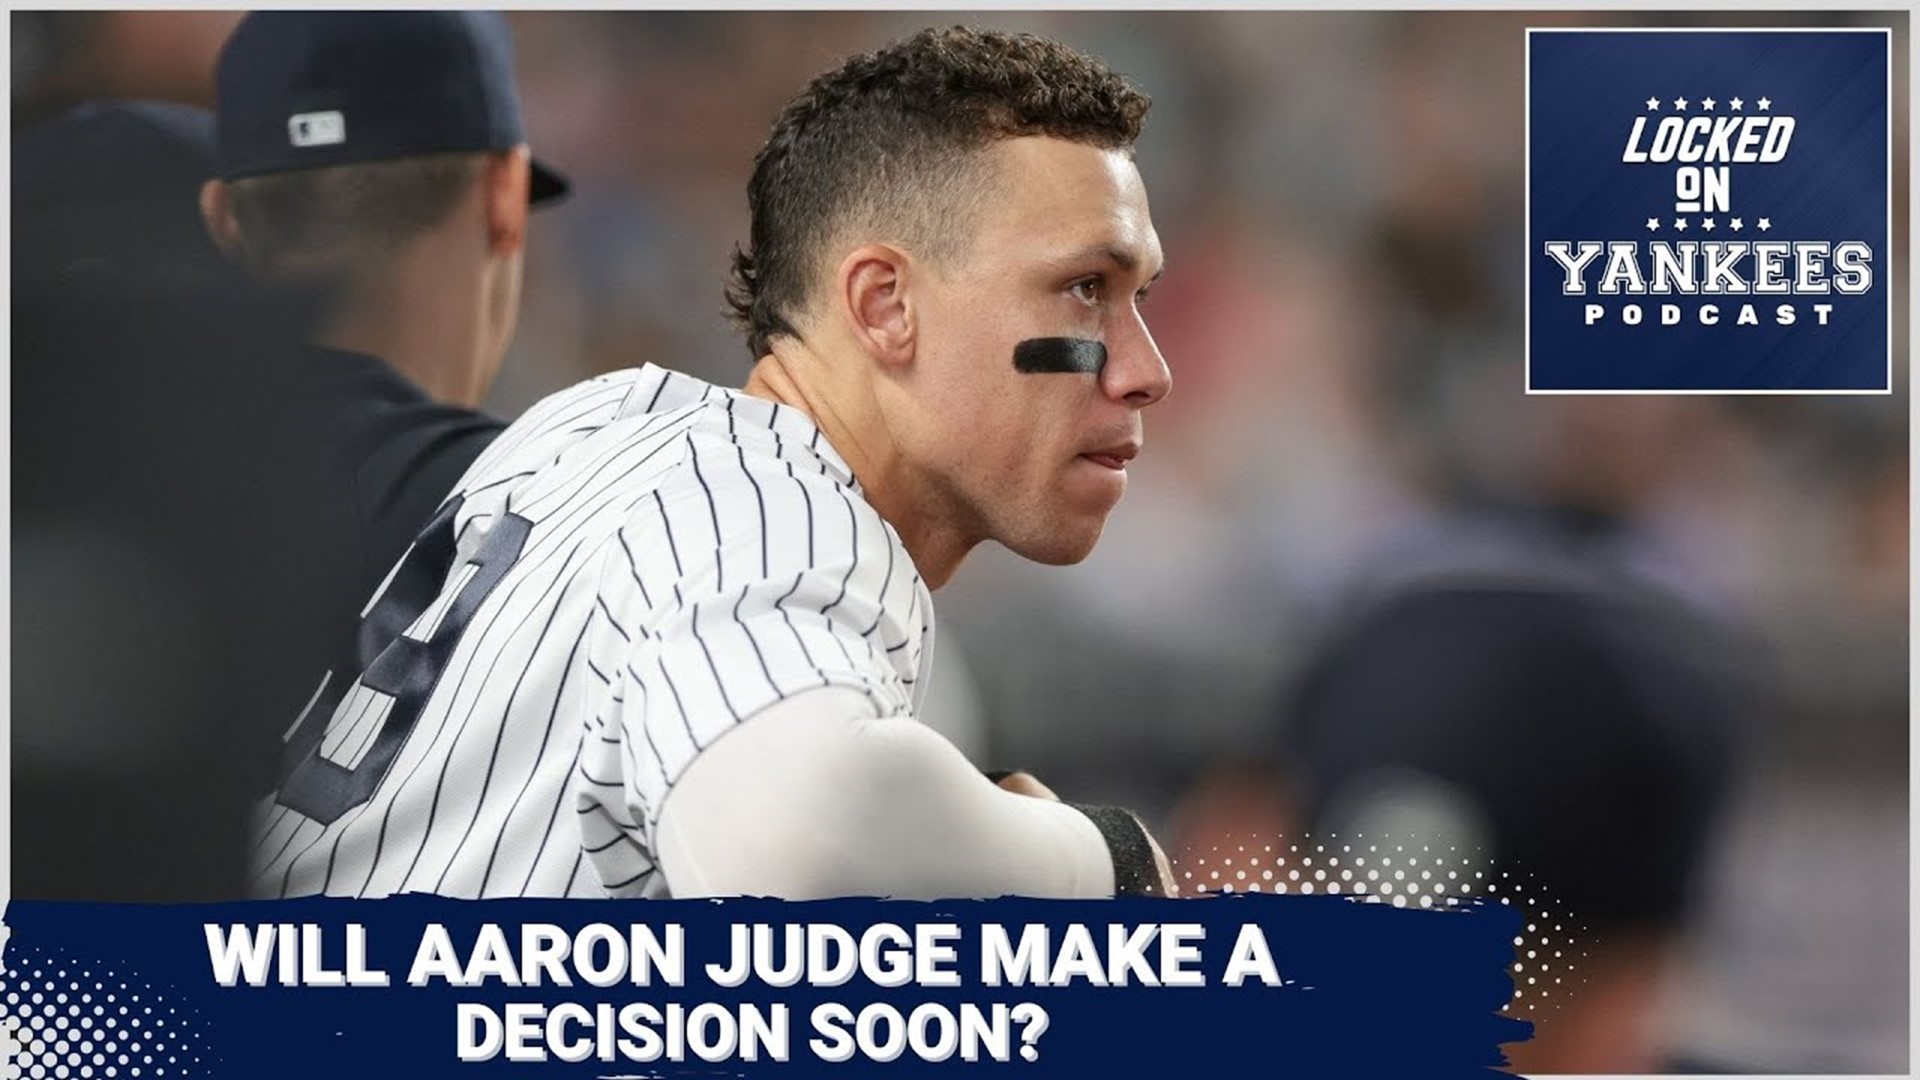 Rumors fly about Aaron Judge's impending decision - Newsday